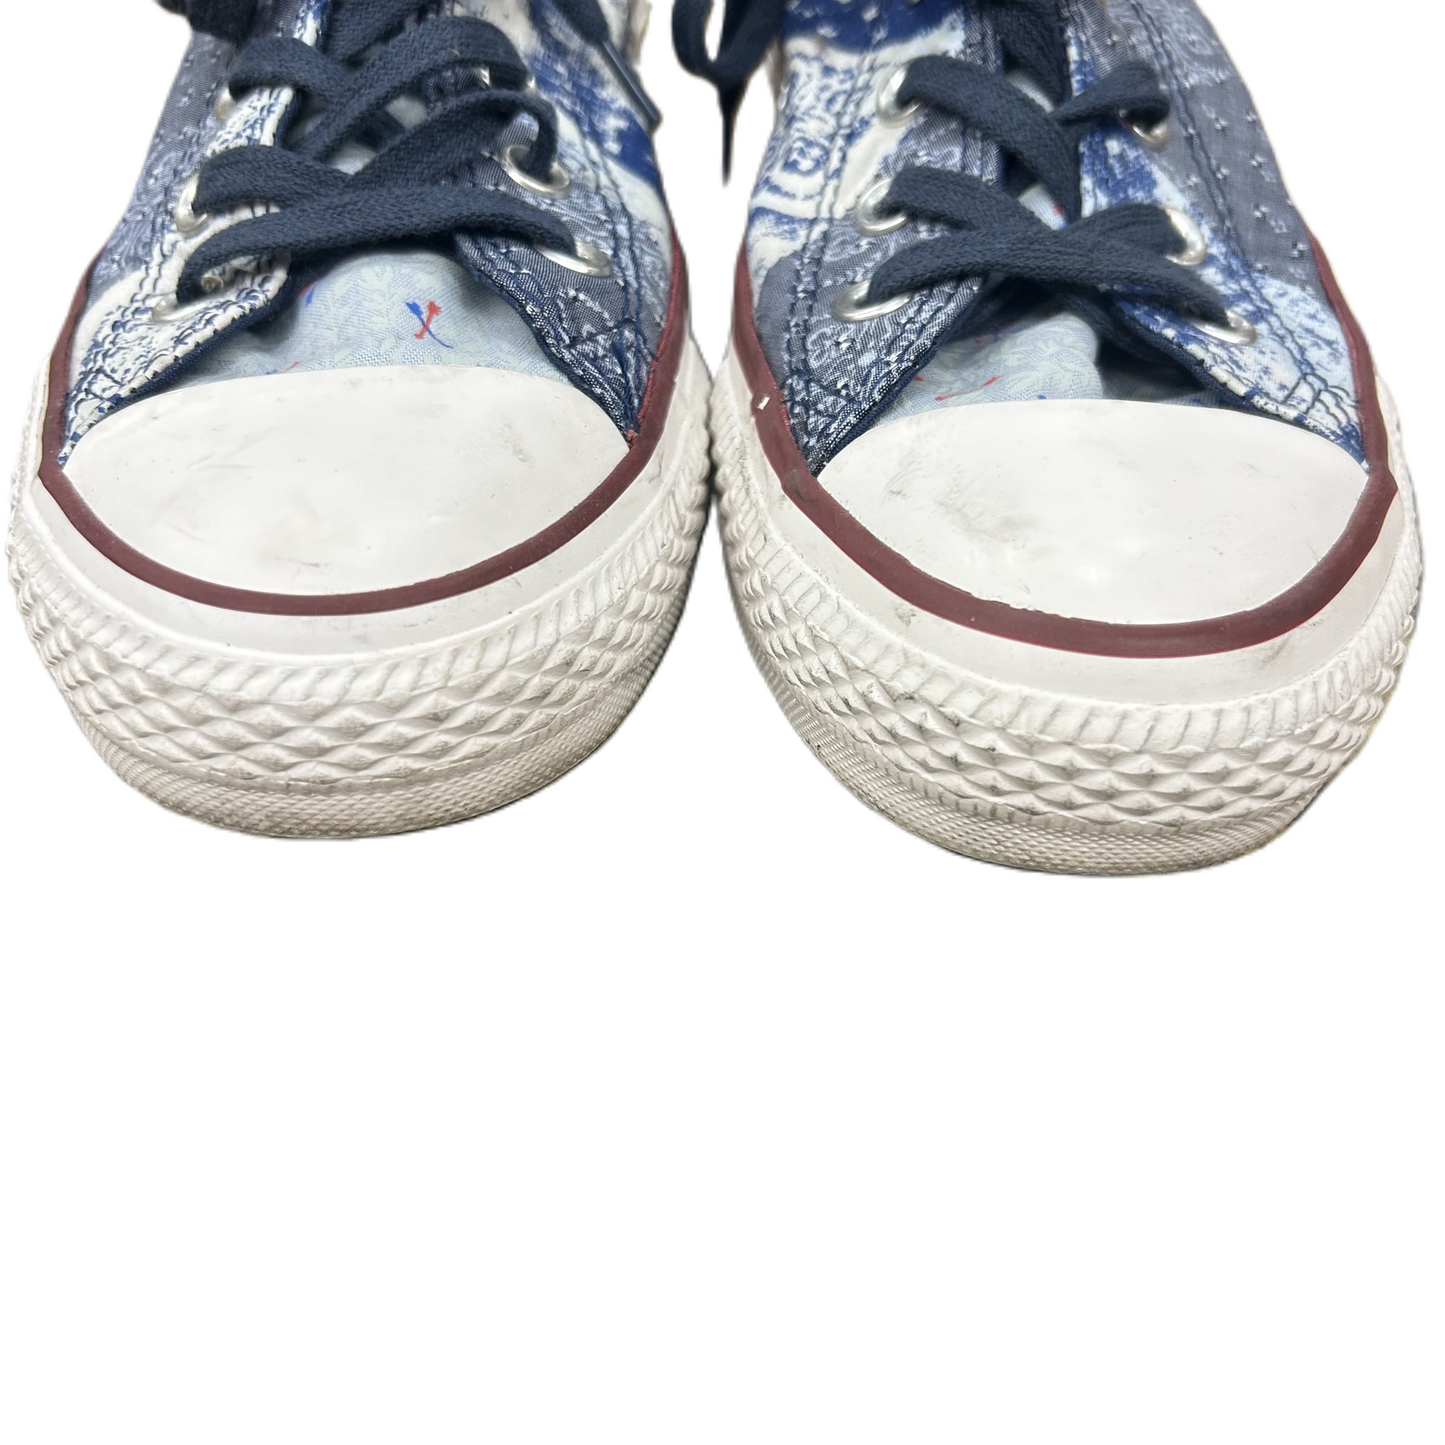 Blue Denim Shoes Sneakers By Converse, Size: 8